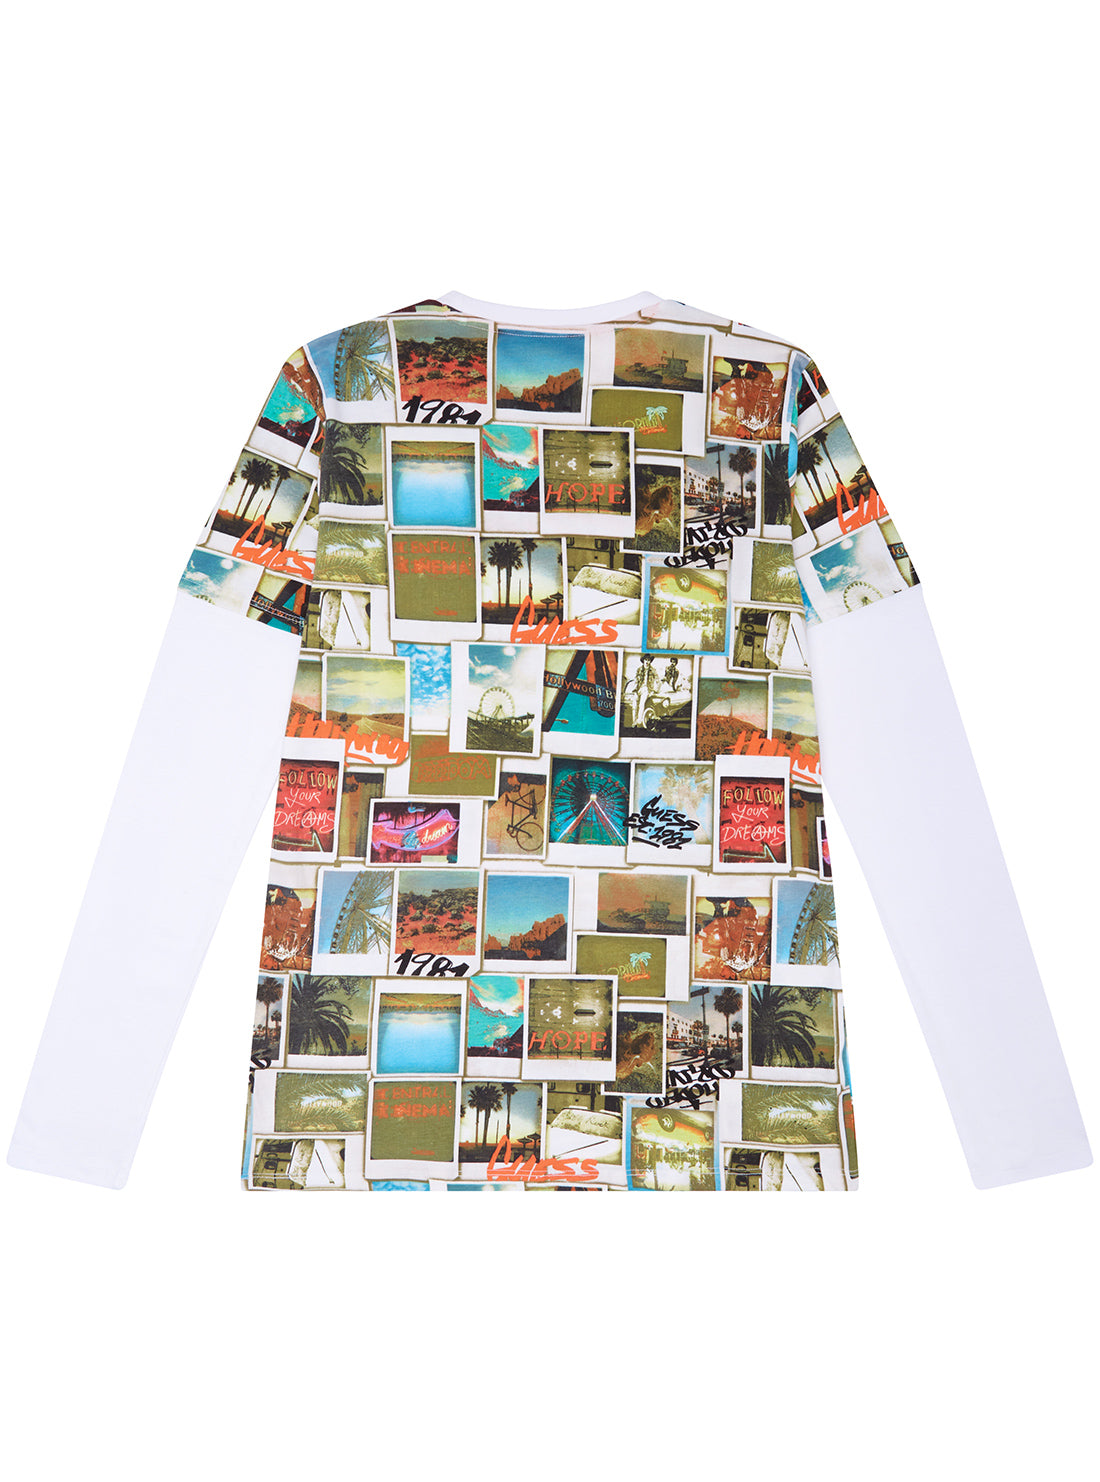 GUESS Photo Collage Long Sleeve T-Shirt (7-16) back view